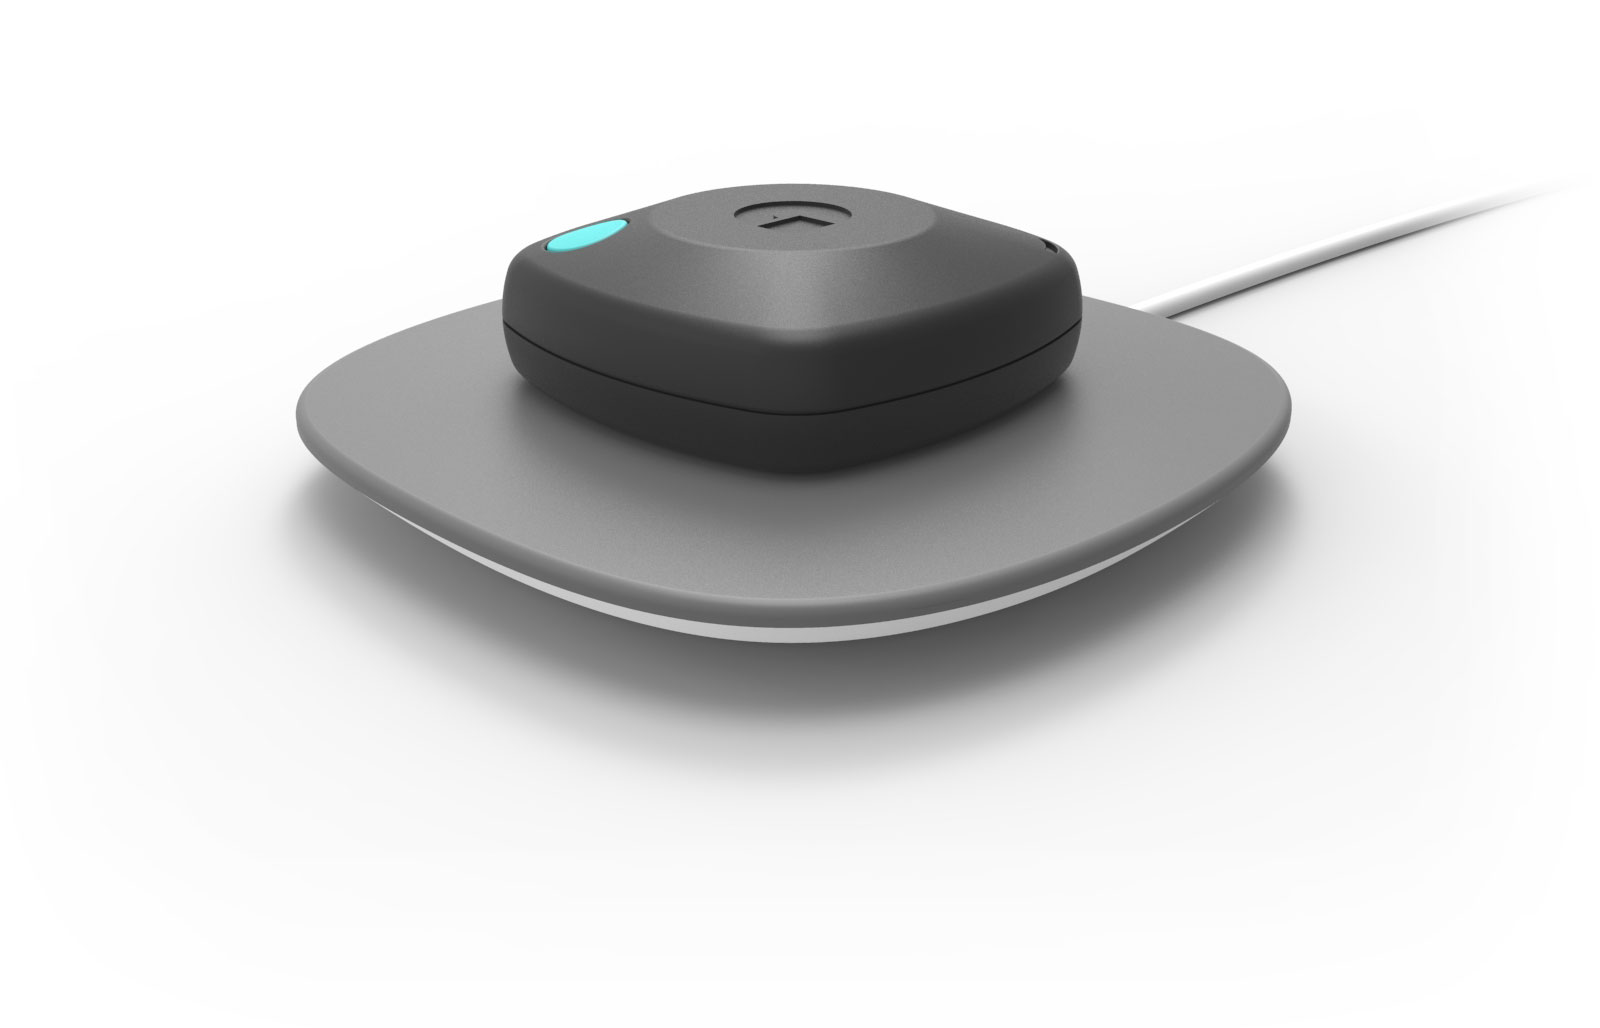 IoT device on wireless charging pad